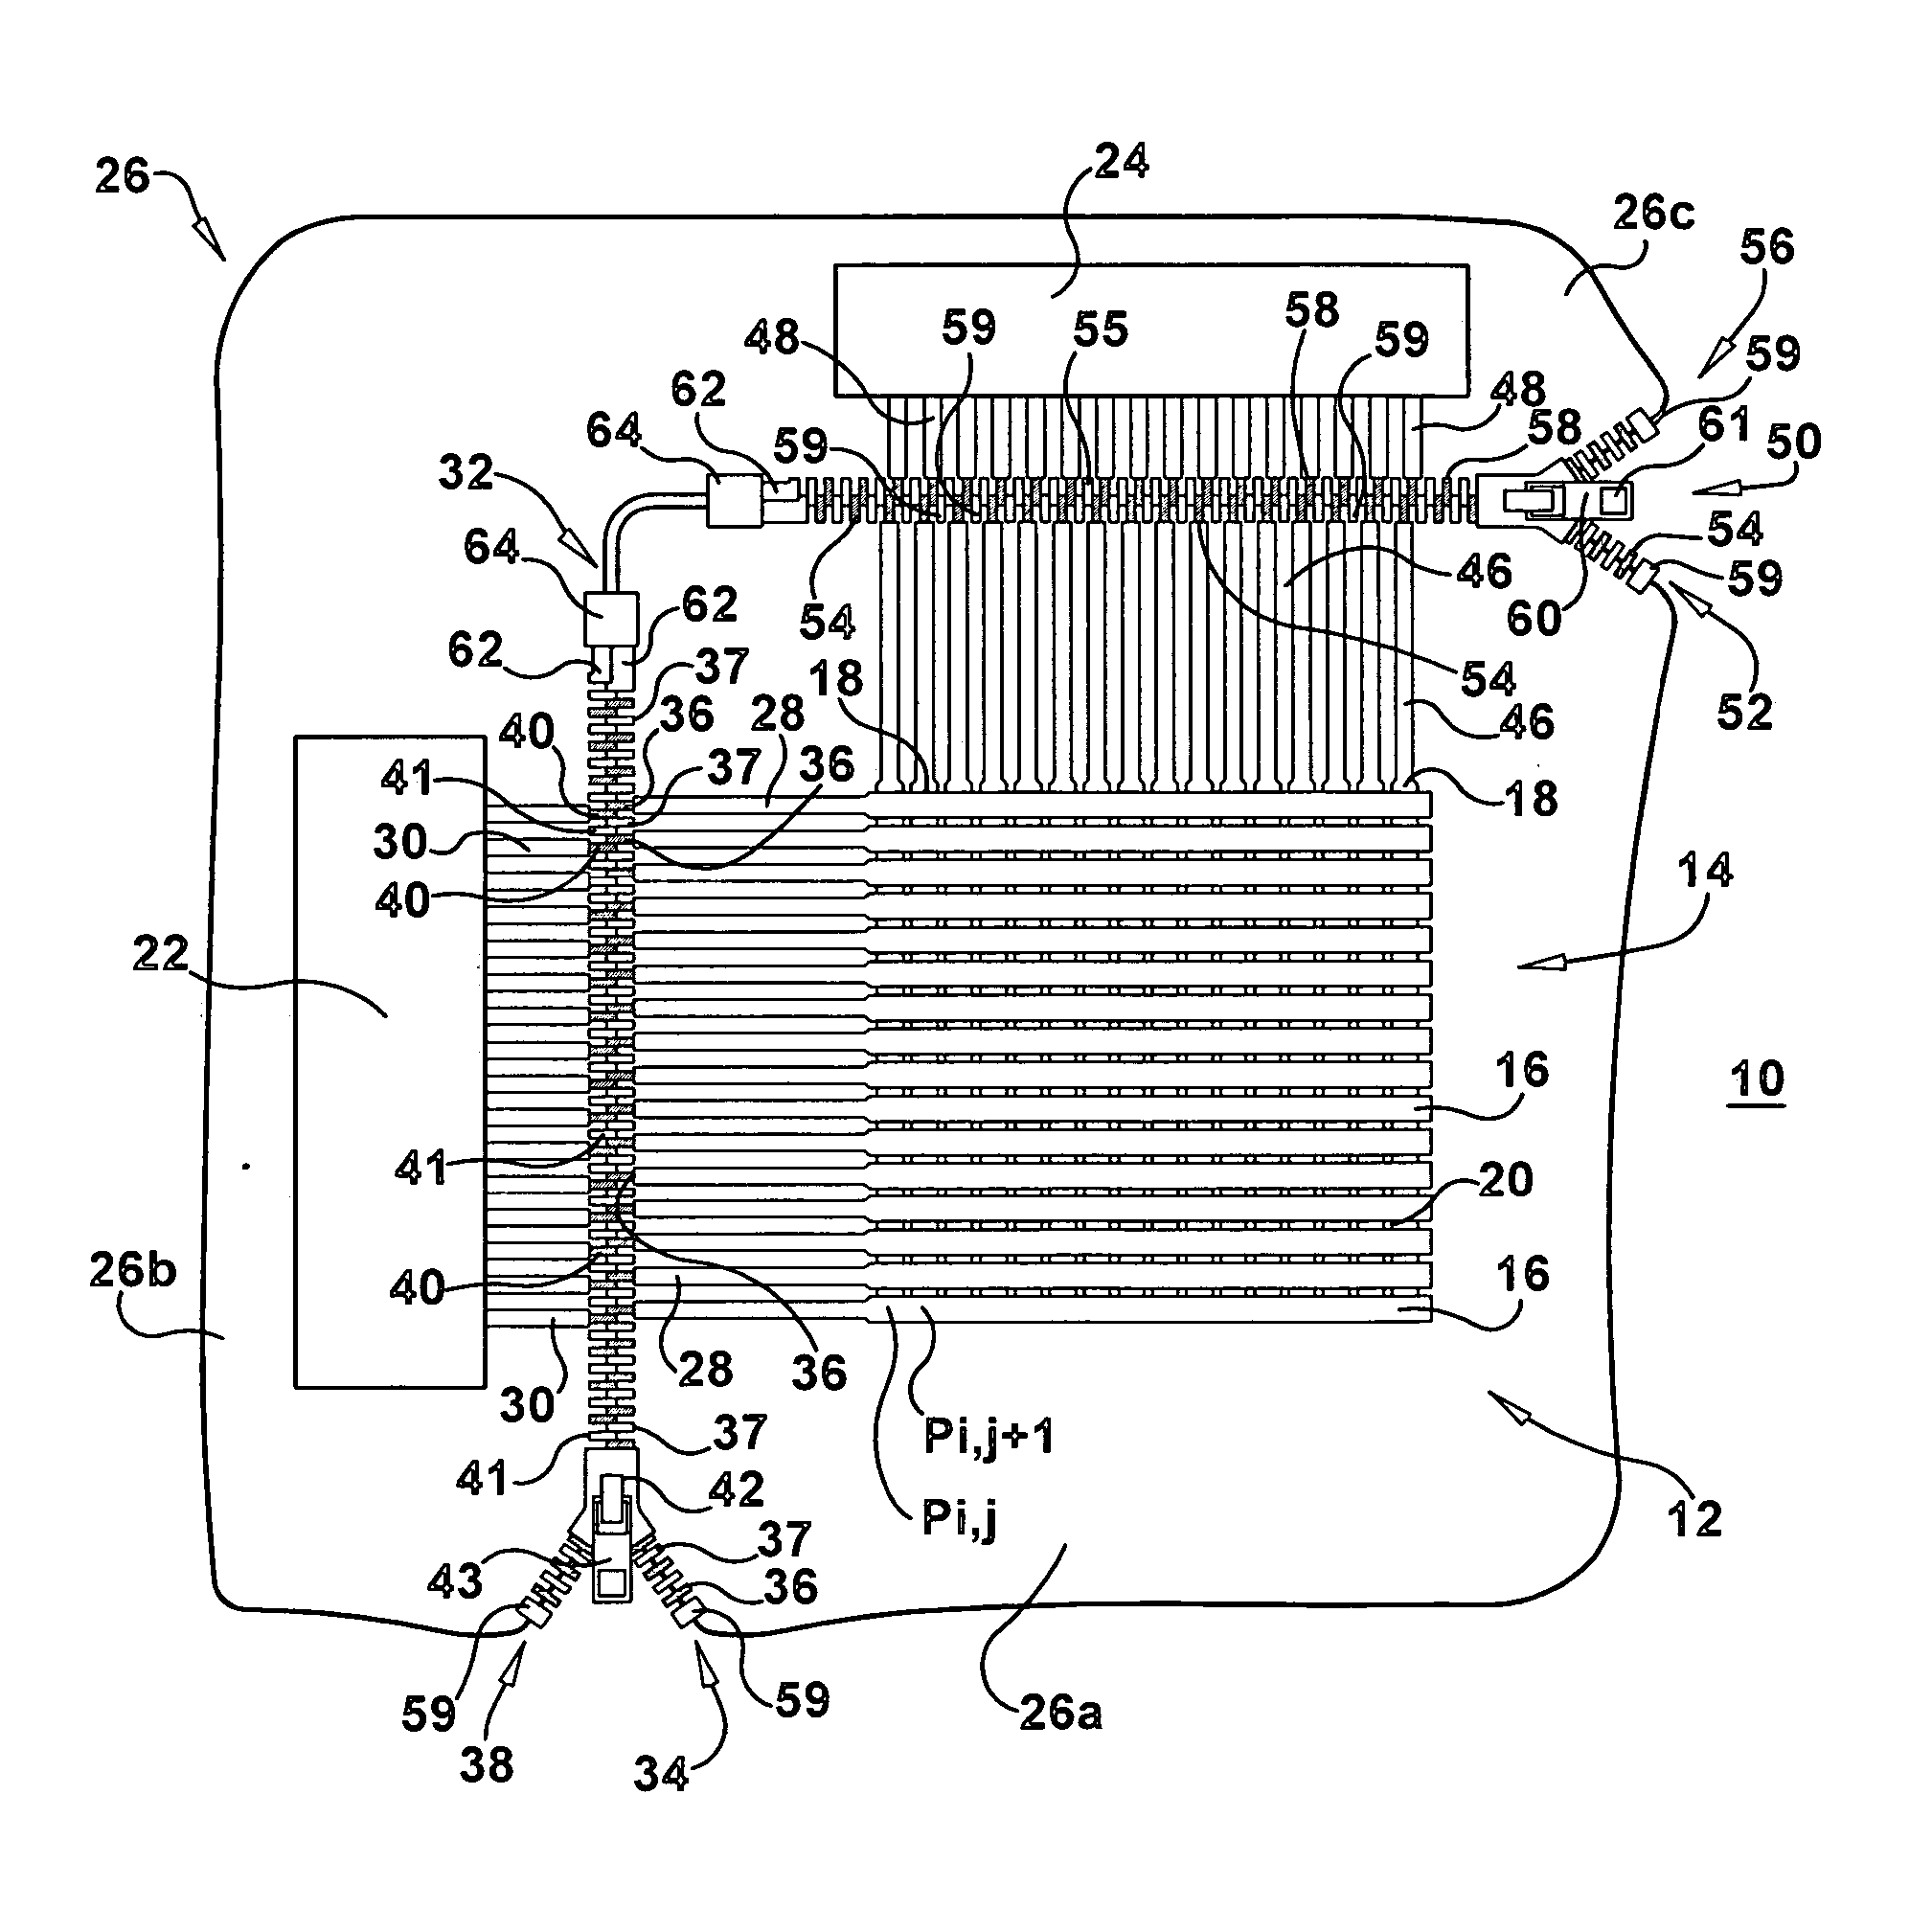 Display device with electrical zipper interconnect